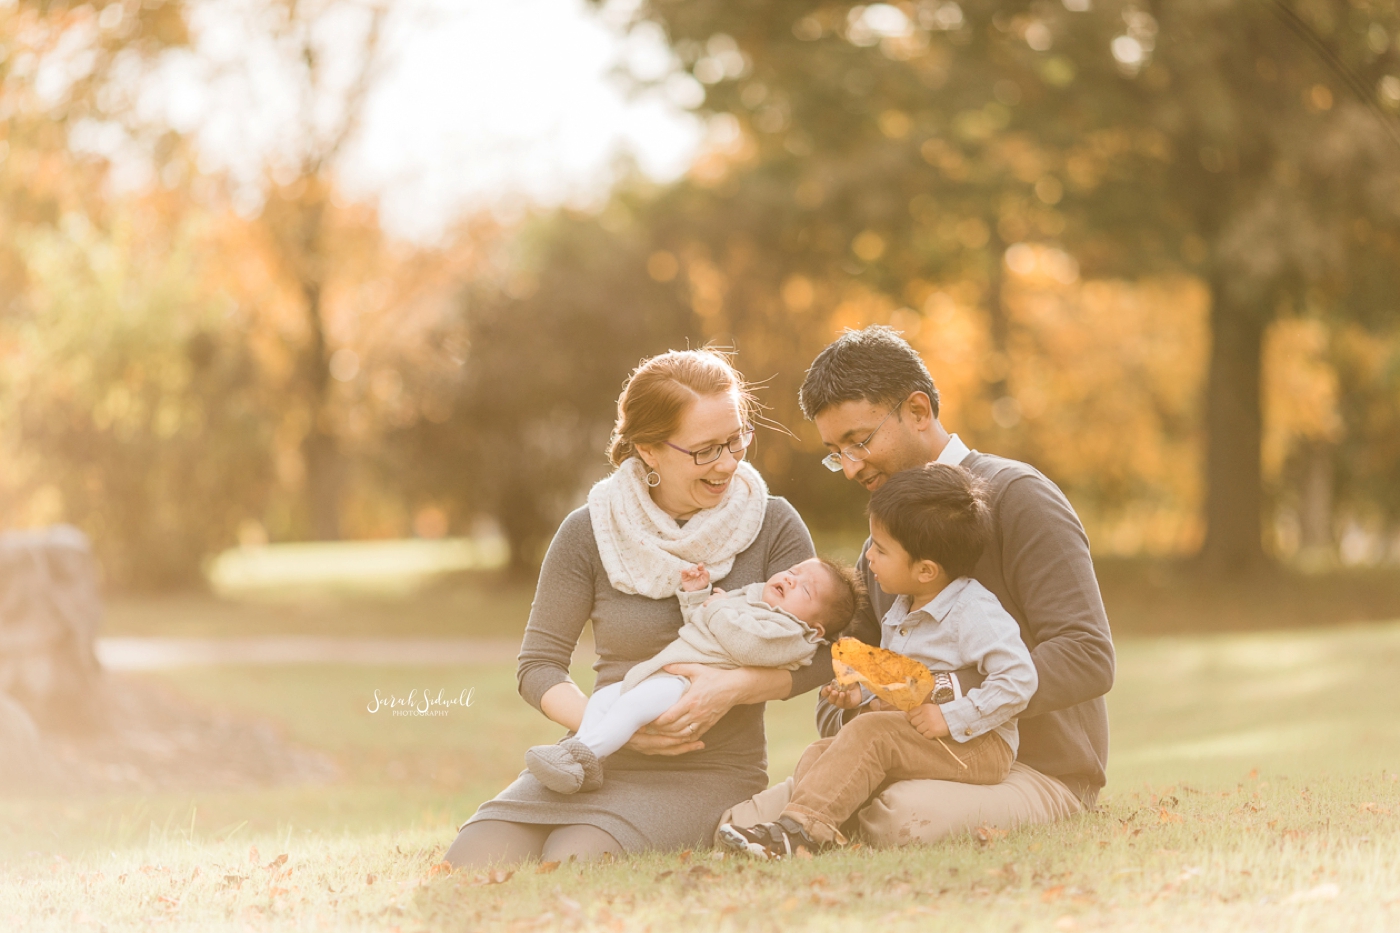 Family Session In The Park | Sarah Sidwell